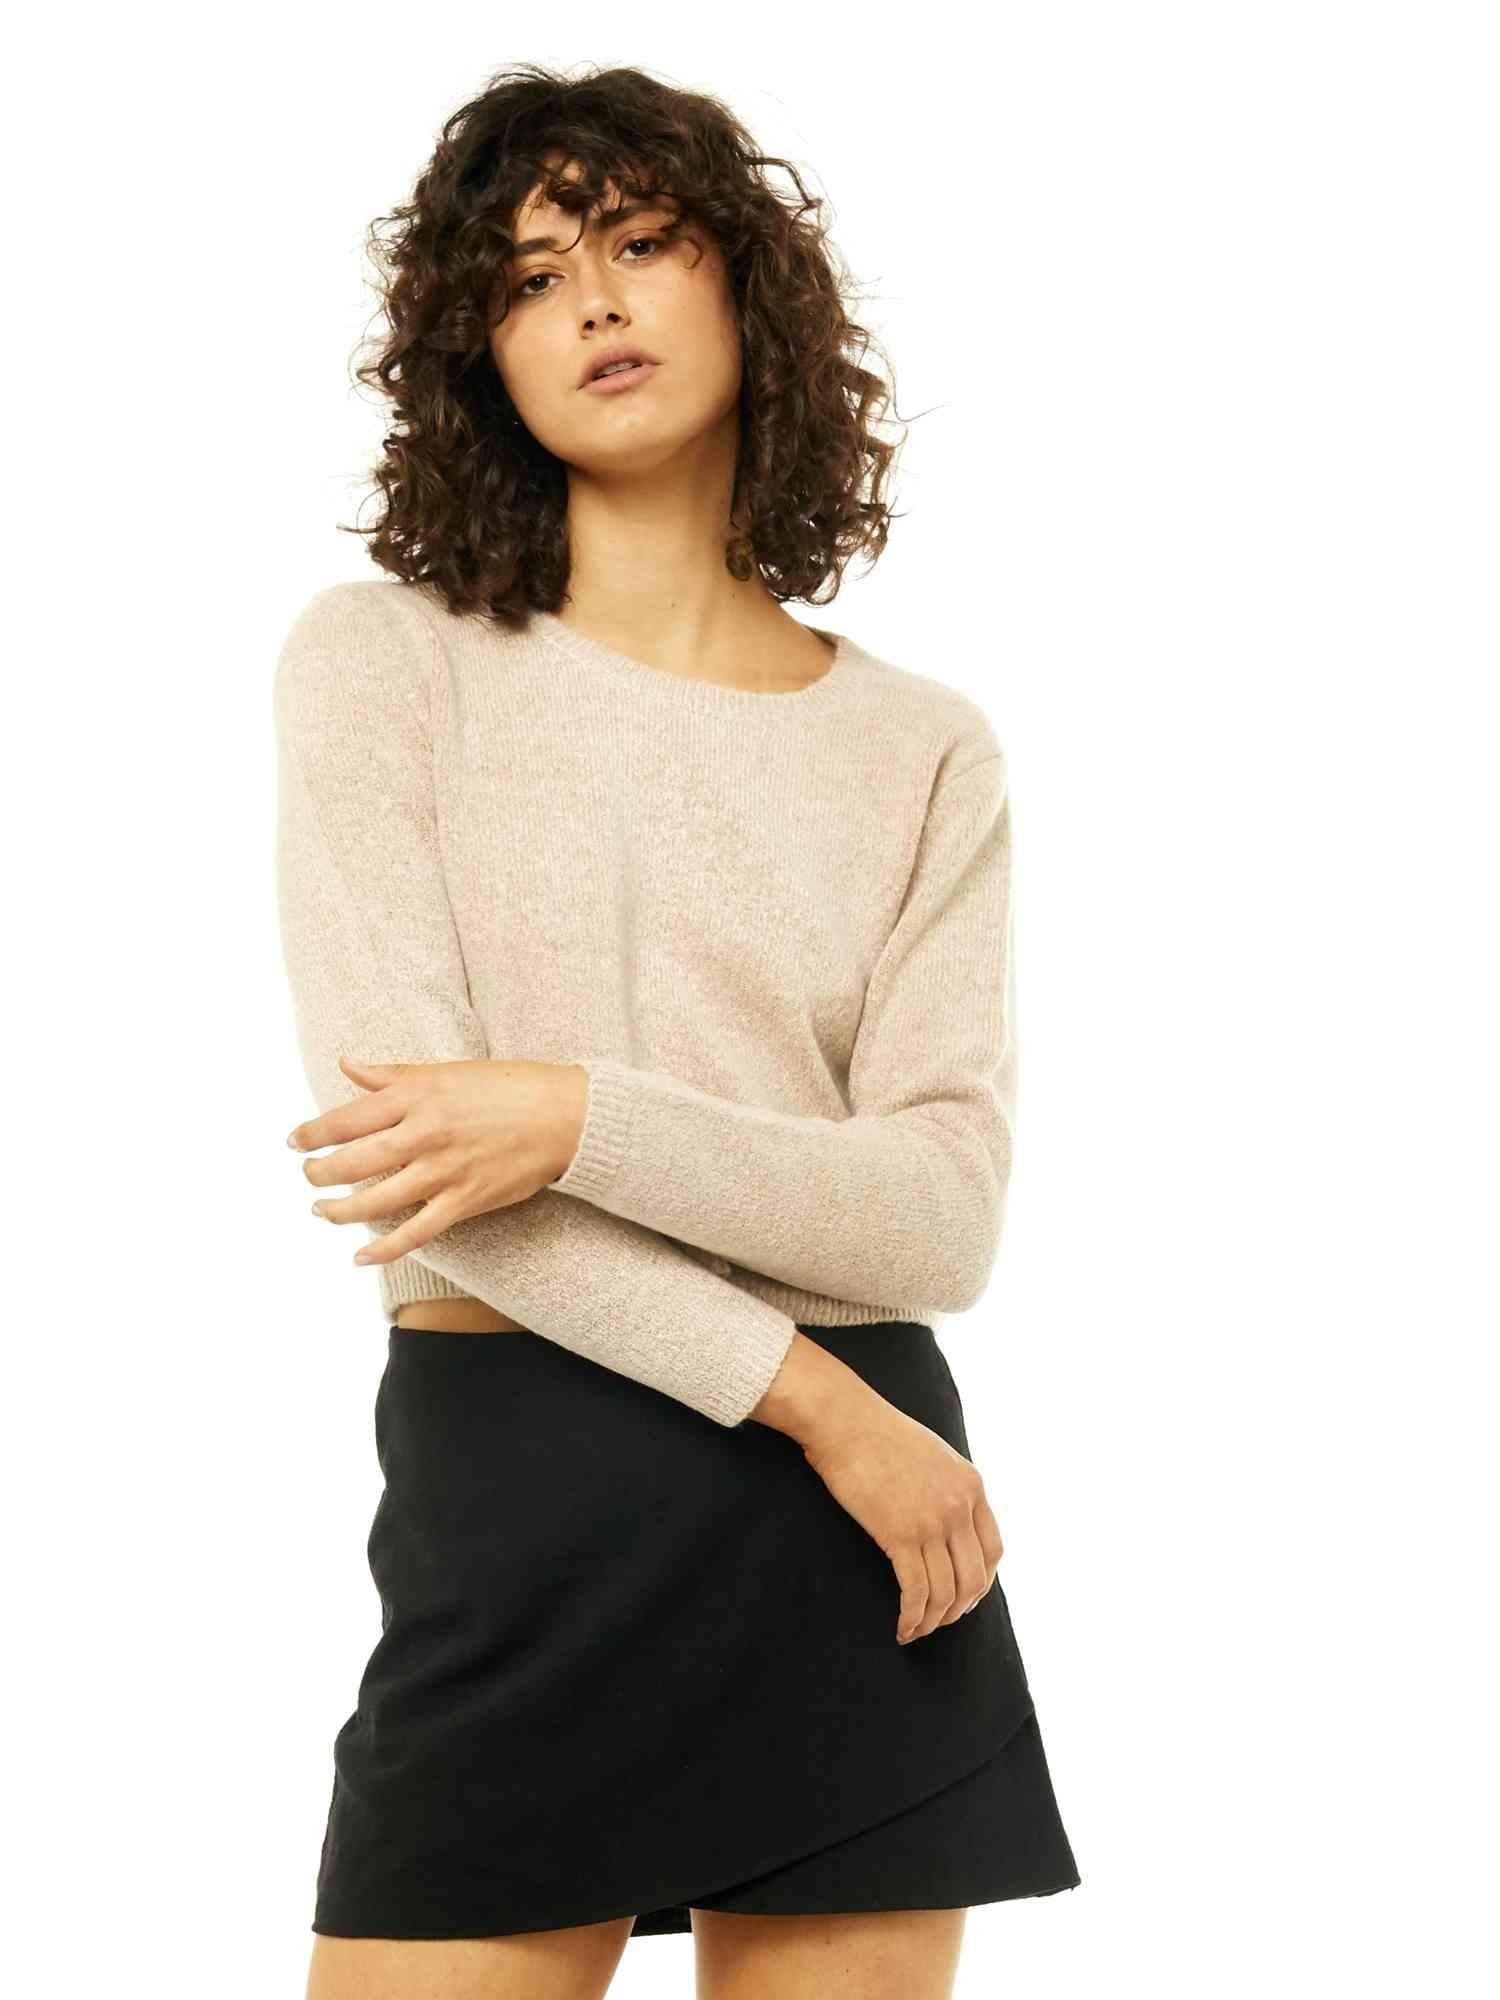 Rusty Together Crew Neck Knit - Sable Rusty Australia, S / Sable